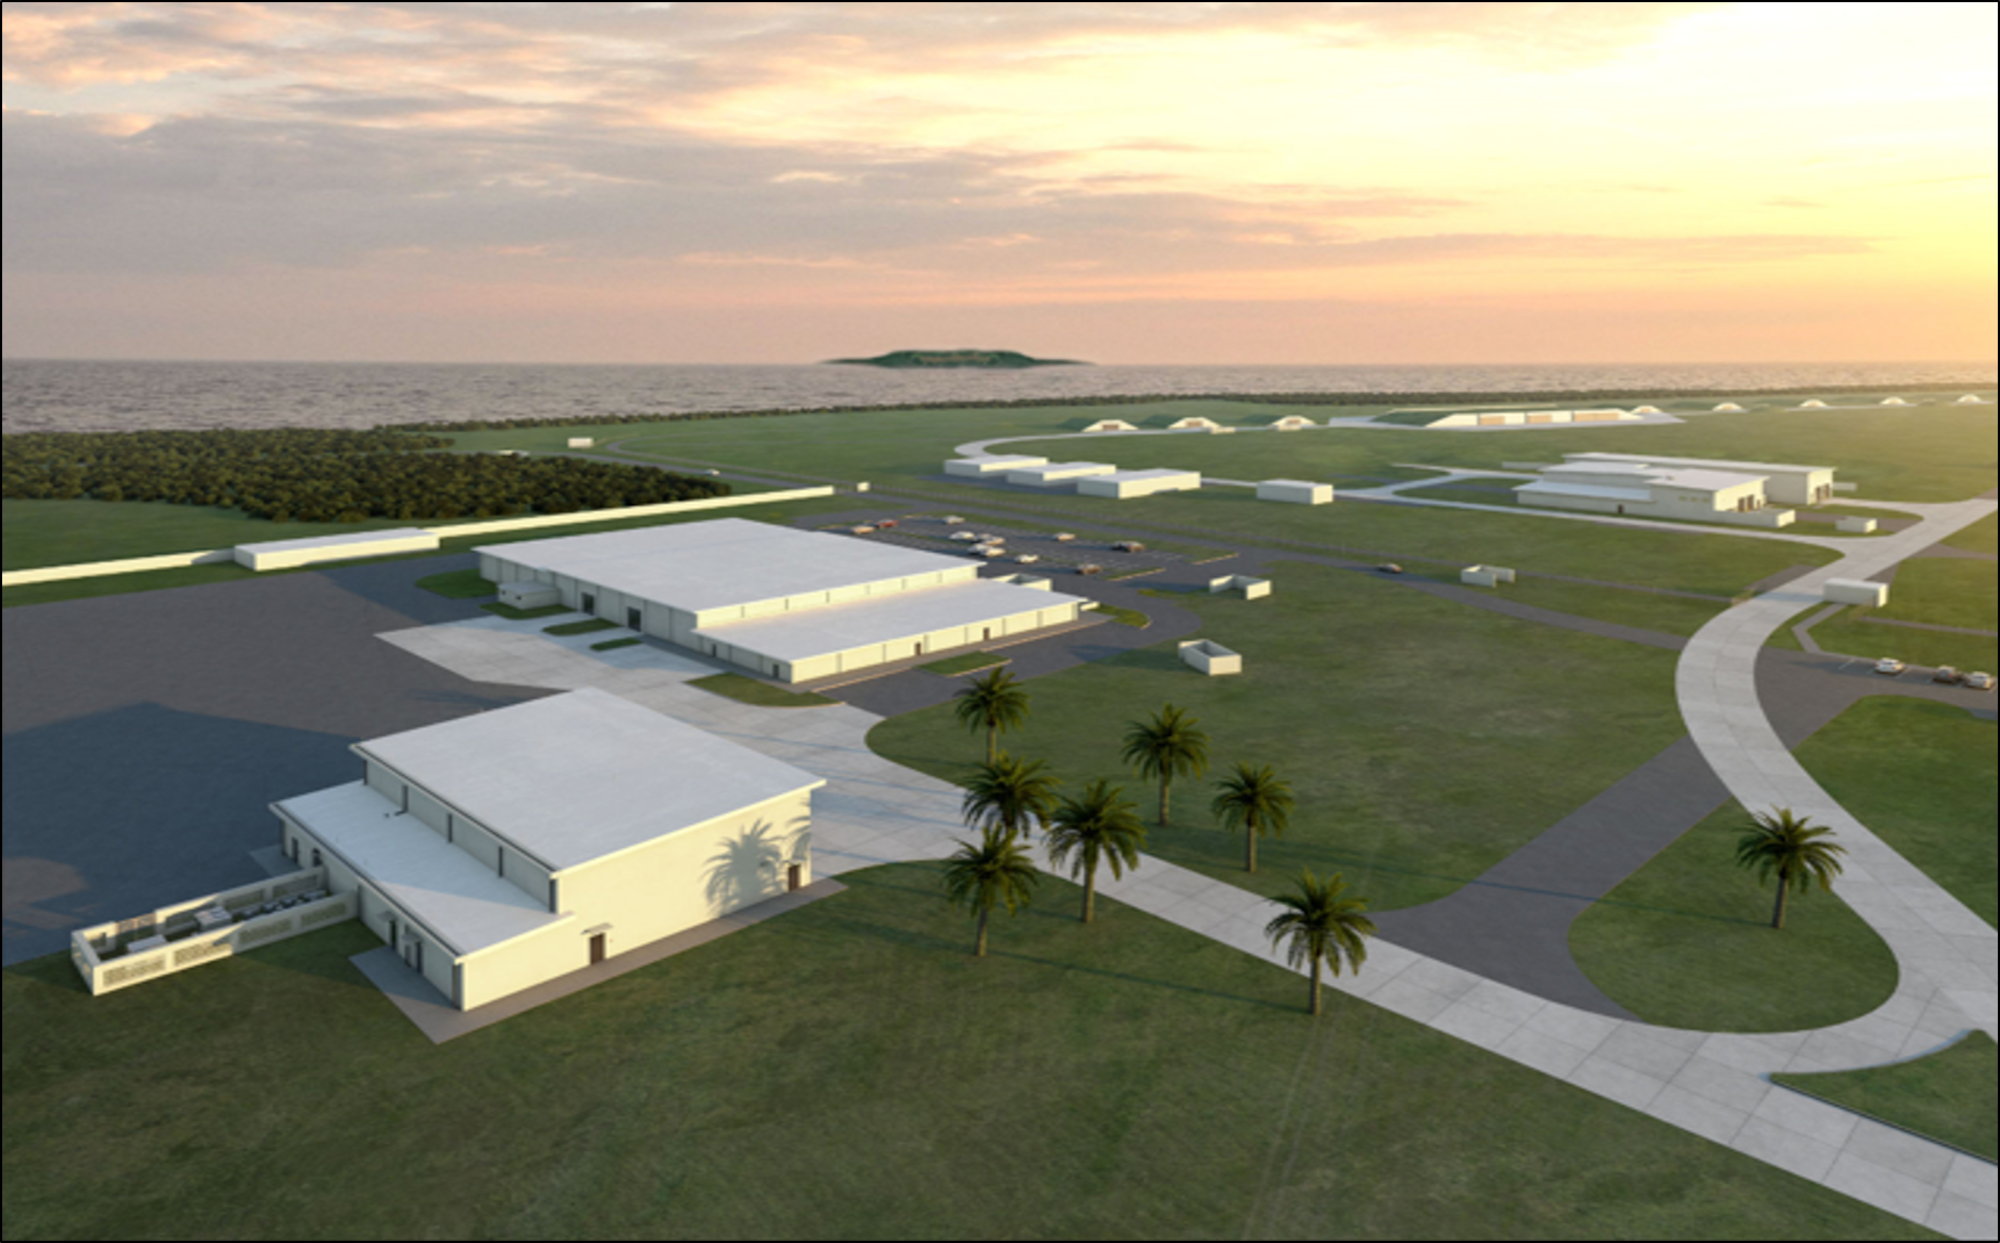 An artist rendering of the new Standoff Weapons Complex at Andersen Air Force Base, Guam.